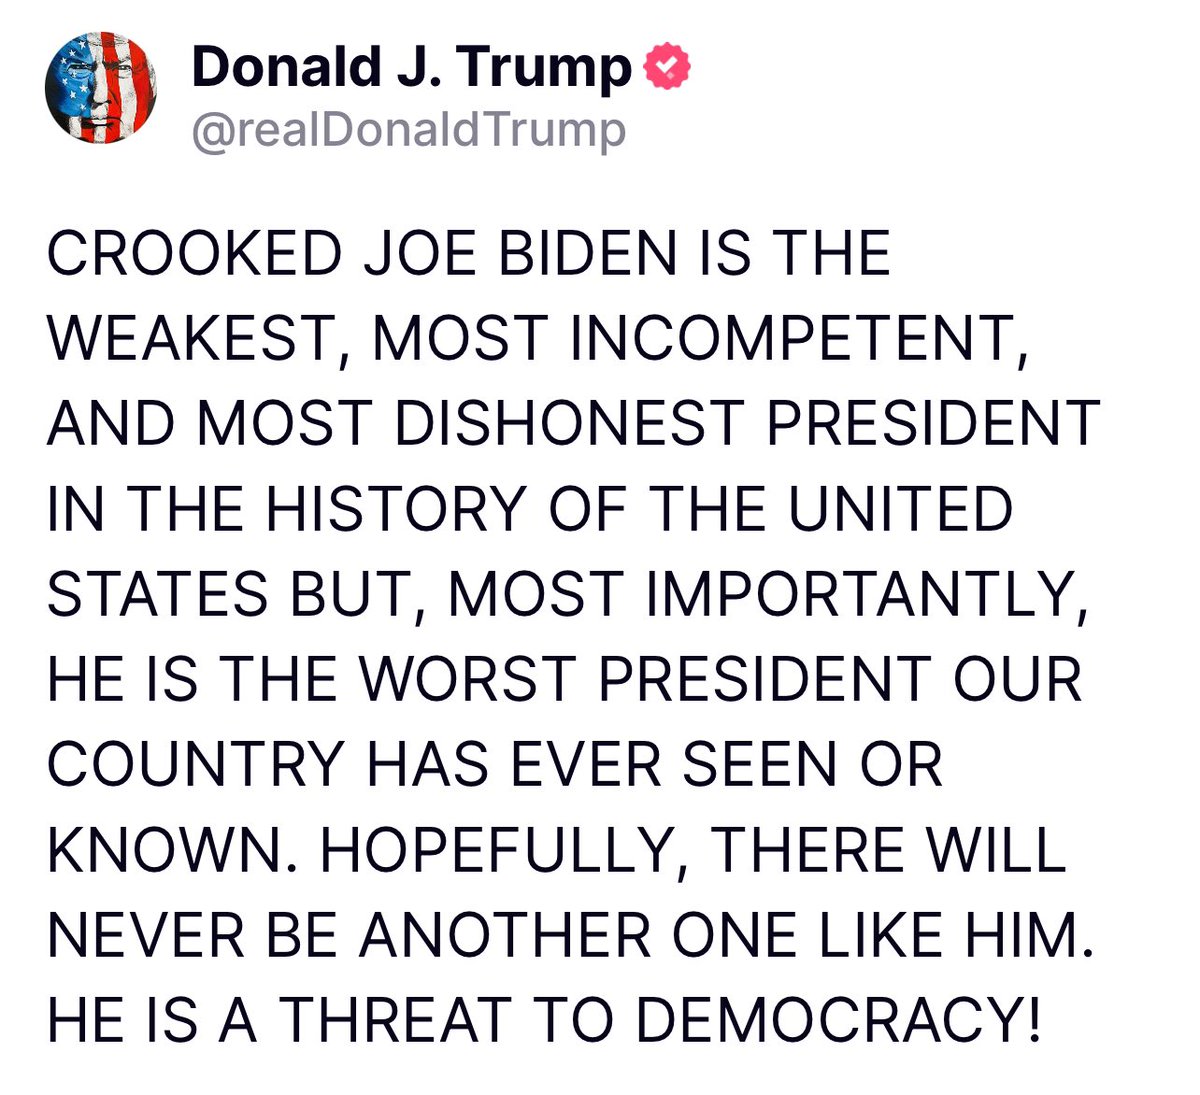 CROOKED JOE BIDEN IS THE WEAKEST, MOST INCOMPETENT, AND MOST DISHONEST PRESIDENT IN THE HISTORY OF THE UNITED STATES BUT, MOST IMPORTANTLY, HE IS THE WORST PRESIDENT OUR COUNTRY HAS EVER SEEN OR KNOWN. HOPEFULLY, THERE WILL NEVER BE ANOTHER ONE LIKE HIM. HE IS A THREAT TO